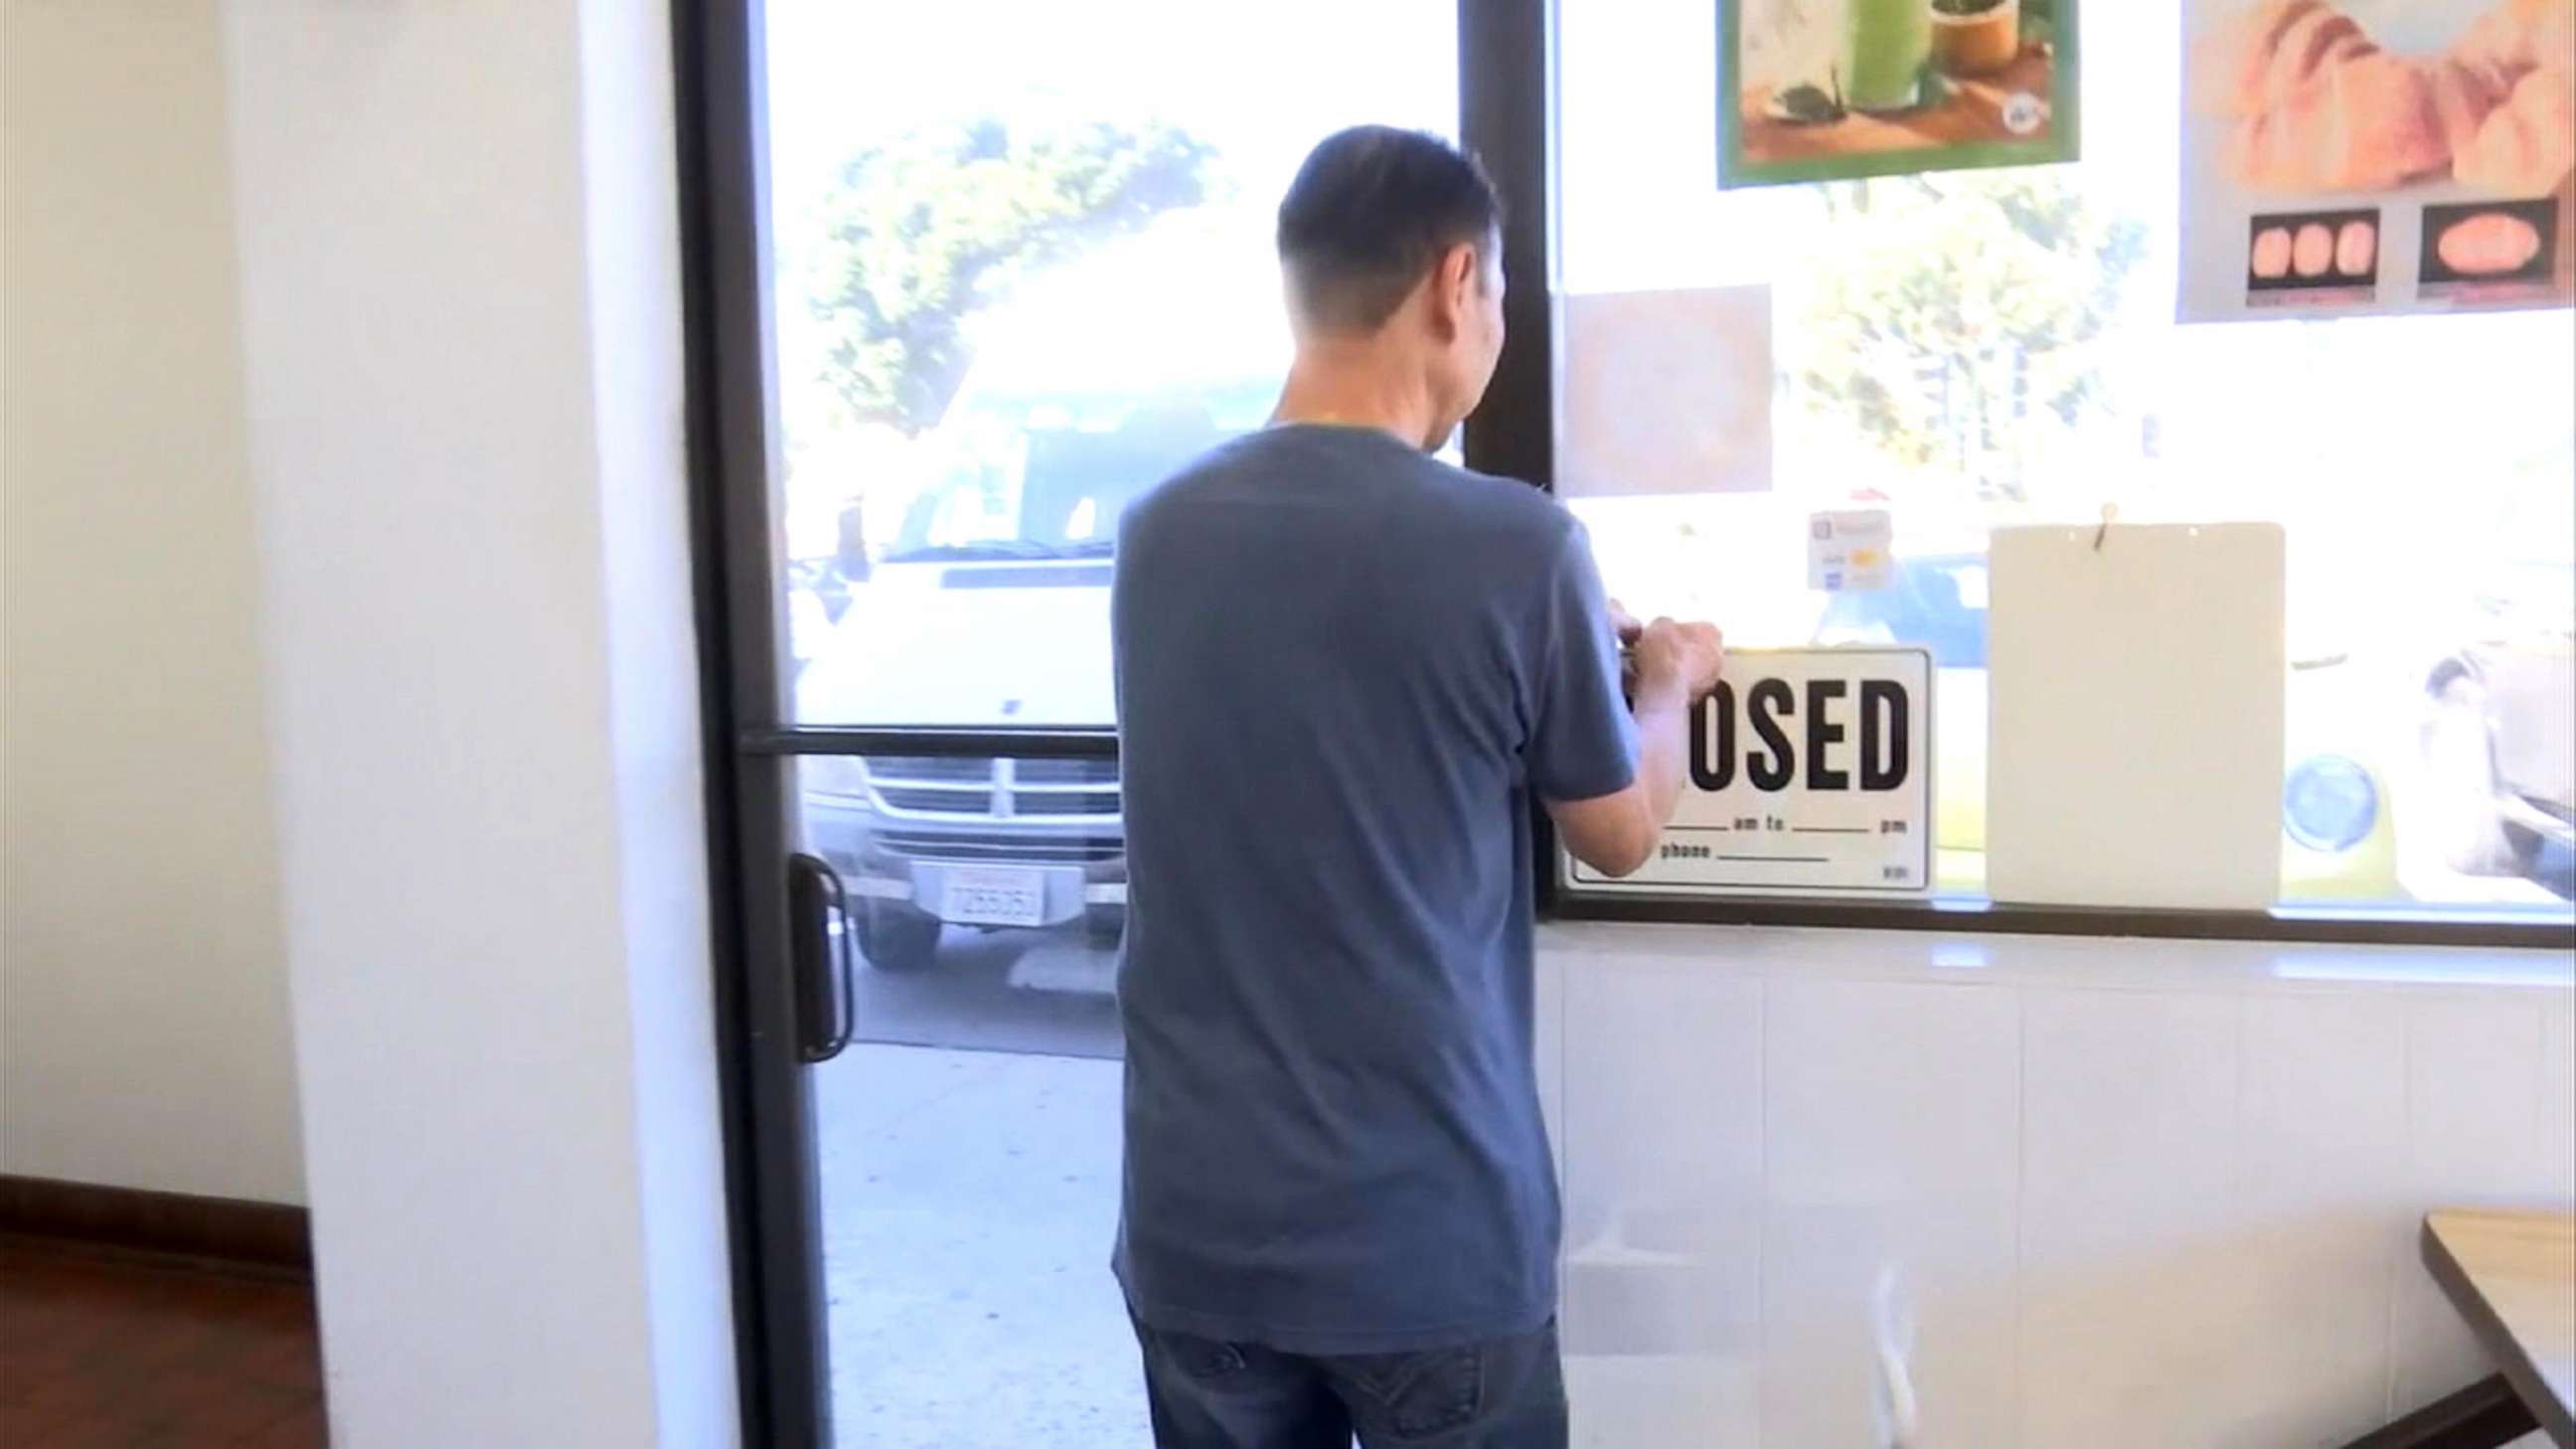 PHOTO: Donut shop owner John Chhan gets ready to close up his shop in Seal Beach, Calif. When his wife, Stalla, fell ill, customers bought up his daily supply so he could close shop and head home to take care of her.